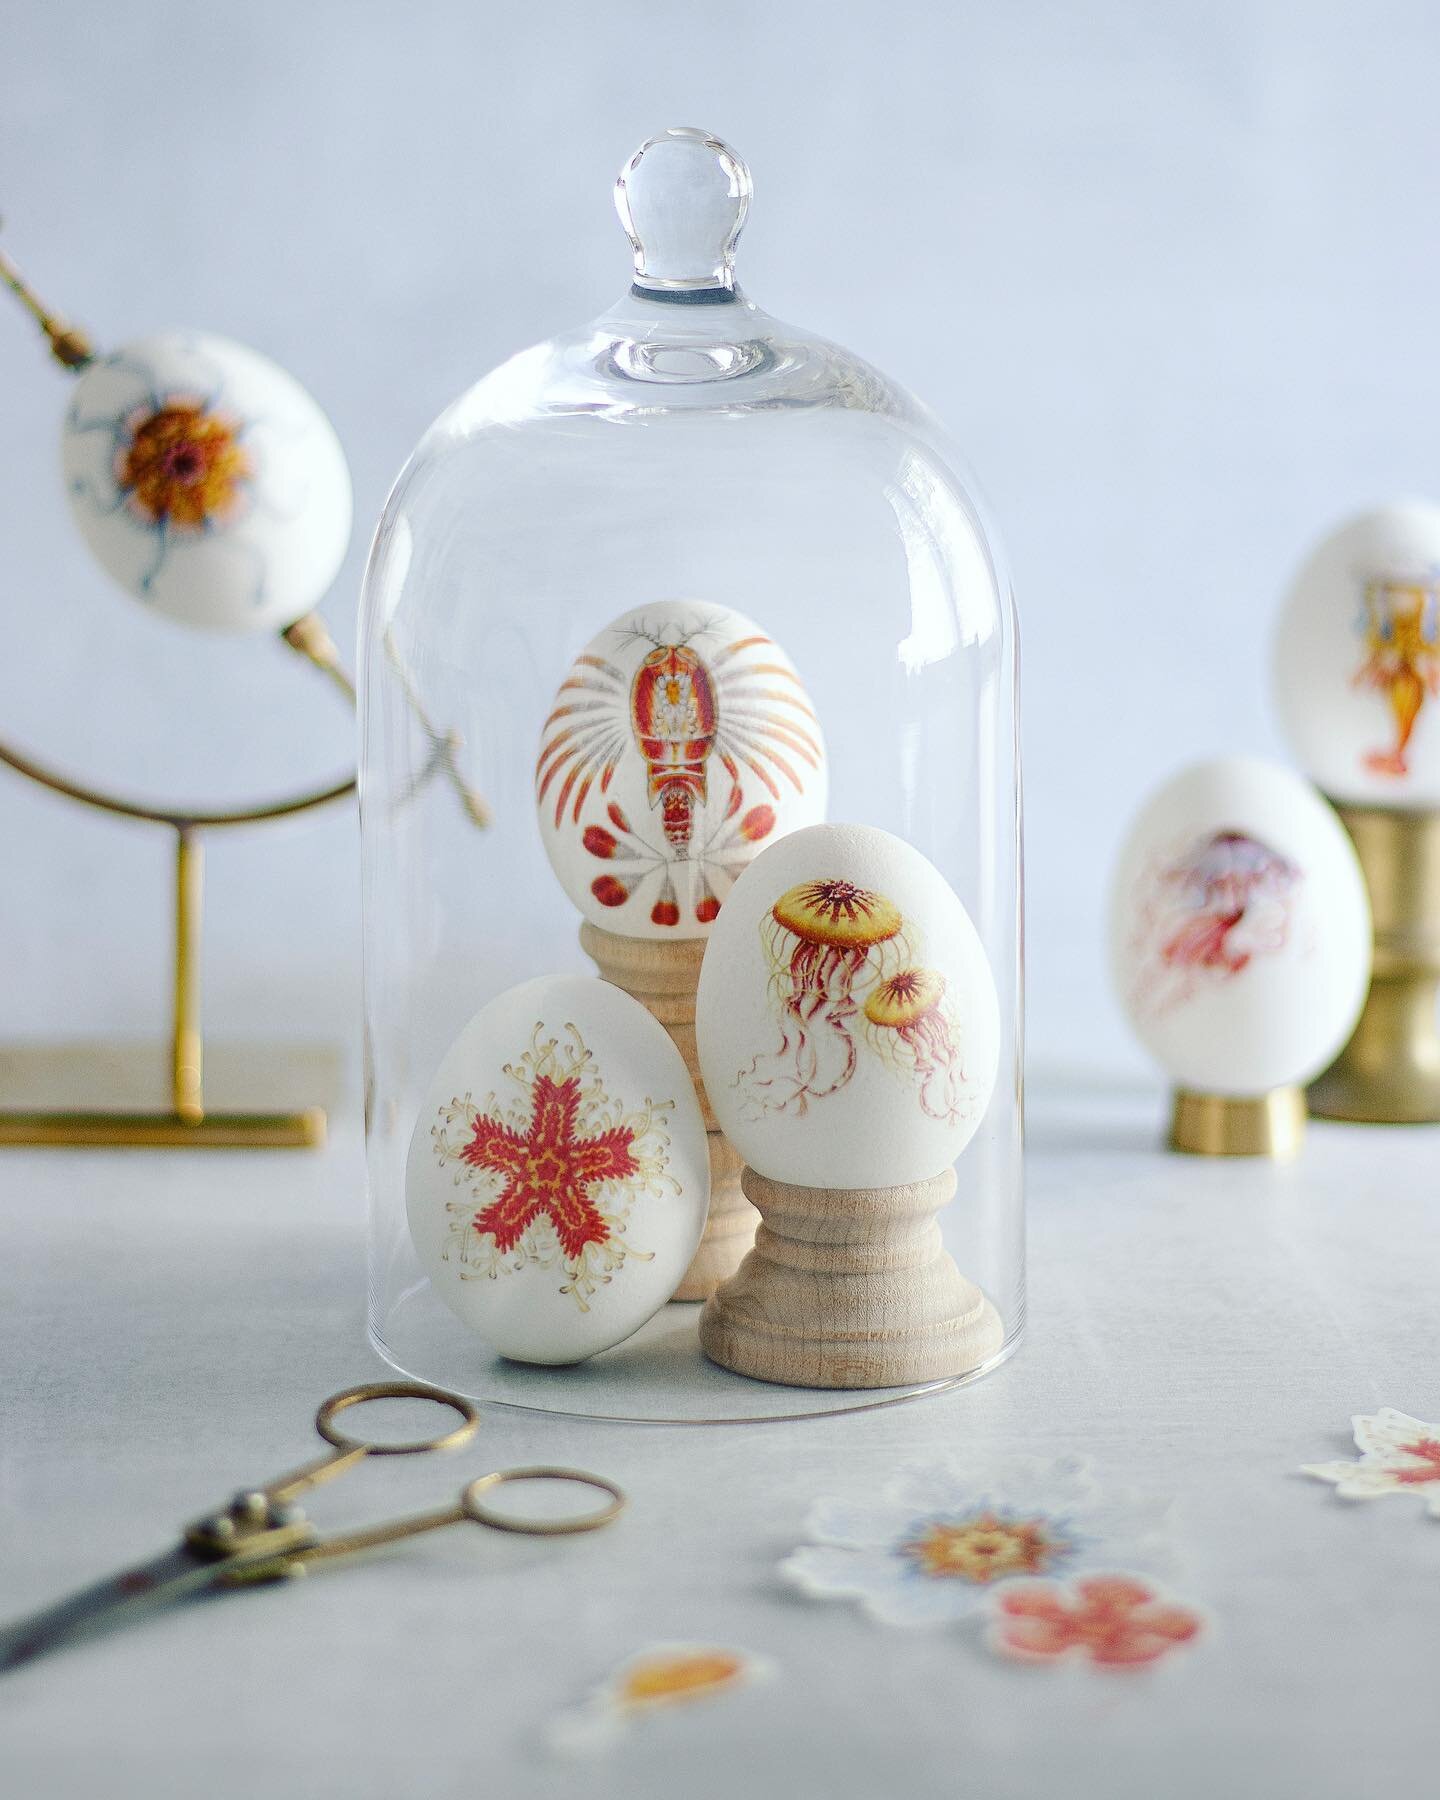 This years apothecary style Easter eggs were inspired by the idea of origins an beginnings, and the art and science of Ernst Haeckel. 
🥚🦞🌟 
posting an IGTV tutorial tomorrow on how to make them 🤓
.
.
.
.
#foodphotography #easter #easterdecor #eas